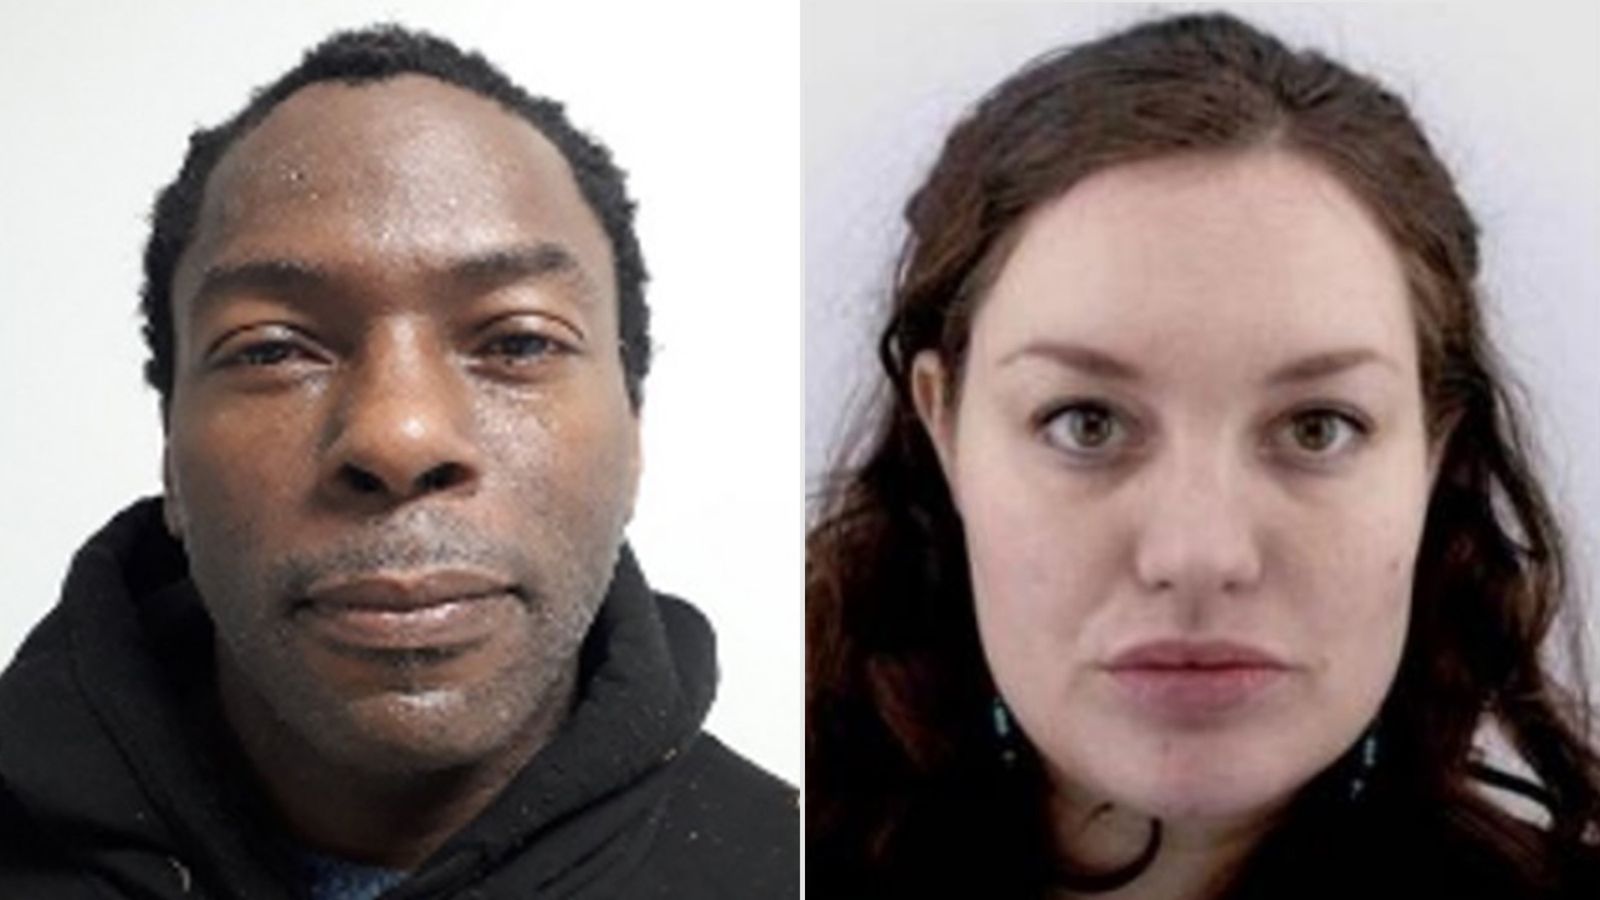 Missing baby search: Couple further arrested on suspicion of gross negligence manslaughter as 200 police look for their child 